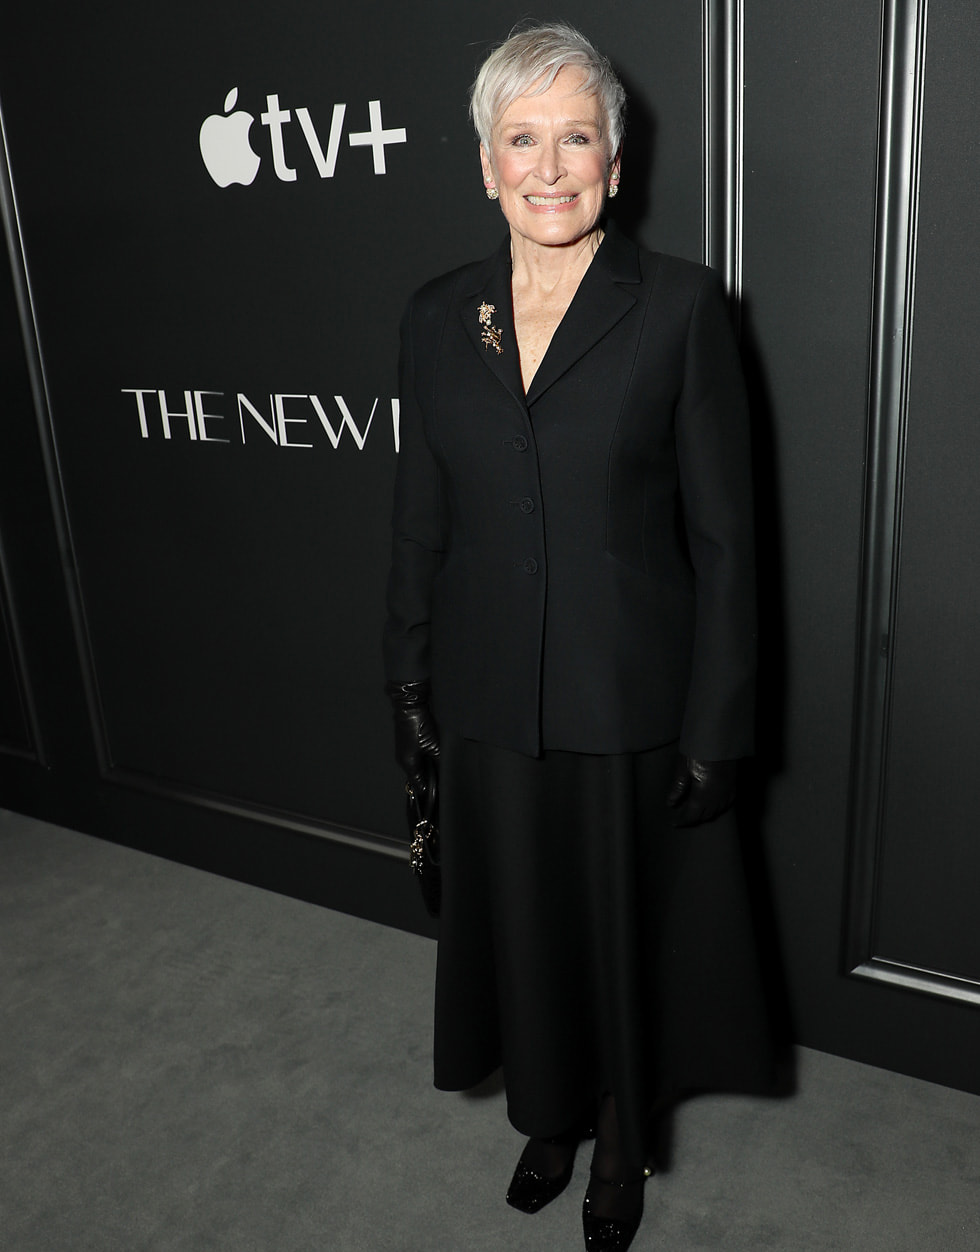 Glenn Close attends the premiere of the Apple TV+ thrilling series “The New Look” at Florence Gould Hall. “The New Look” will make its global debut on Apple TV+ on Wednesday, February 14, 2024.